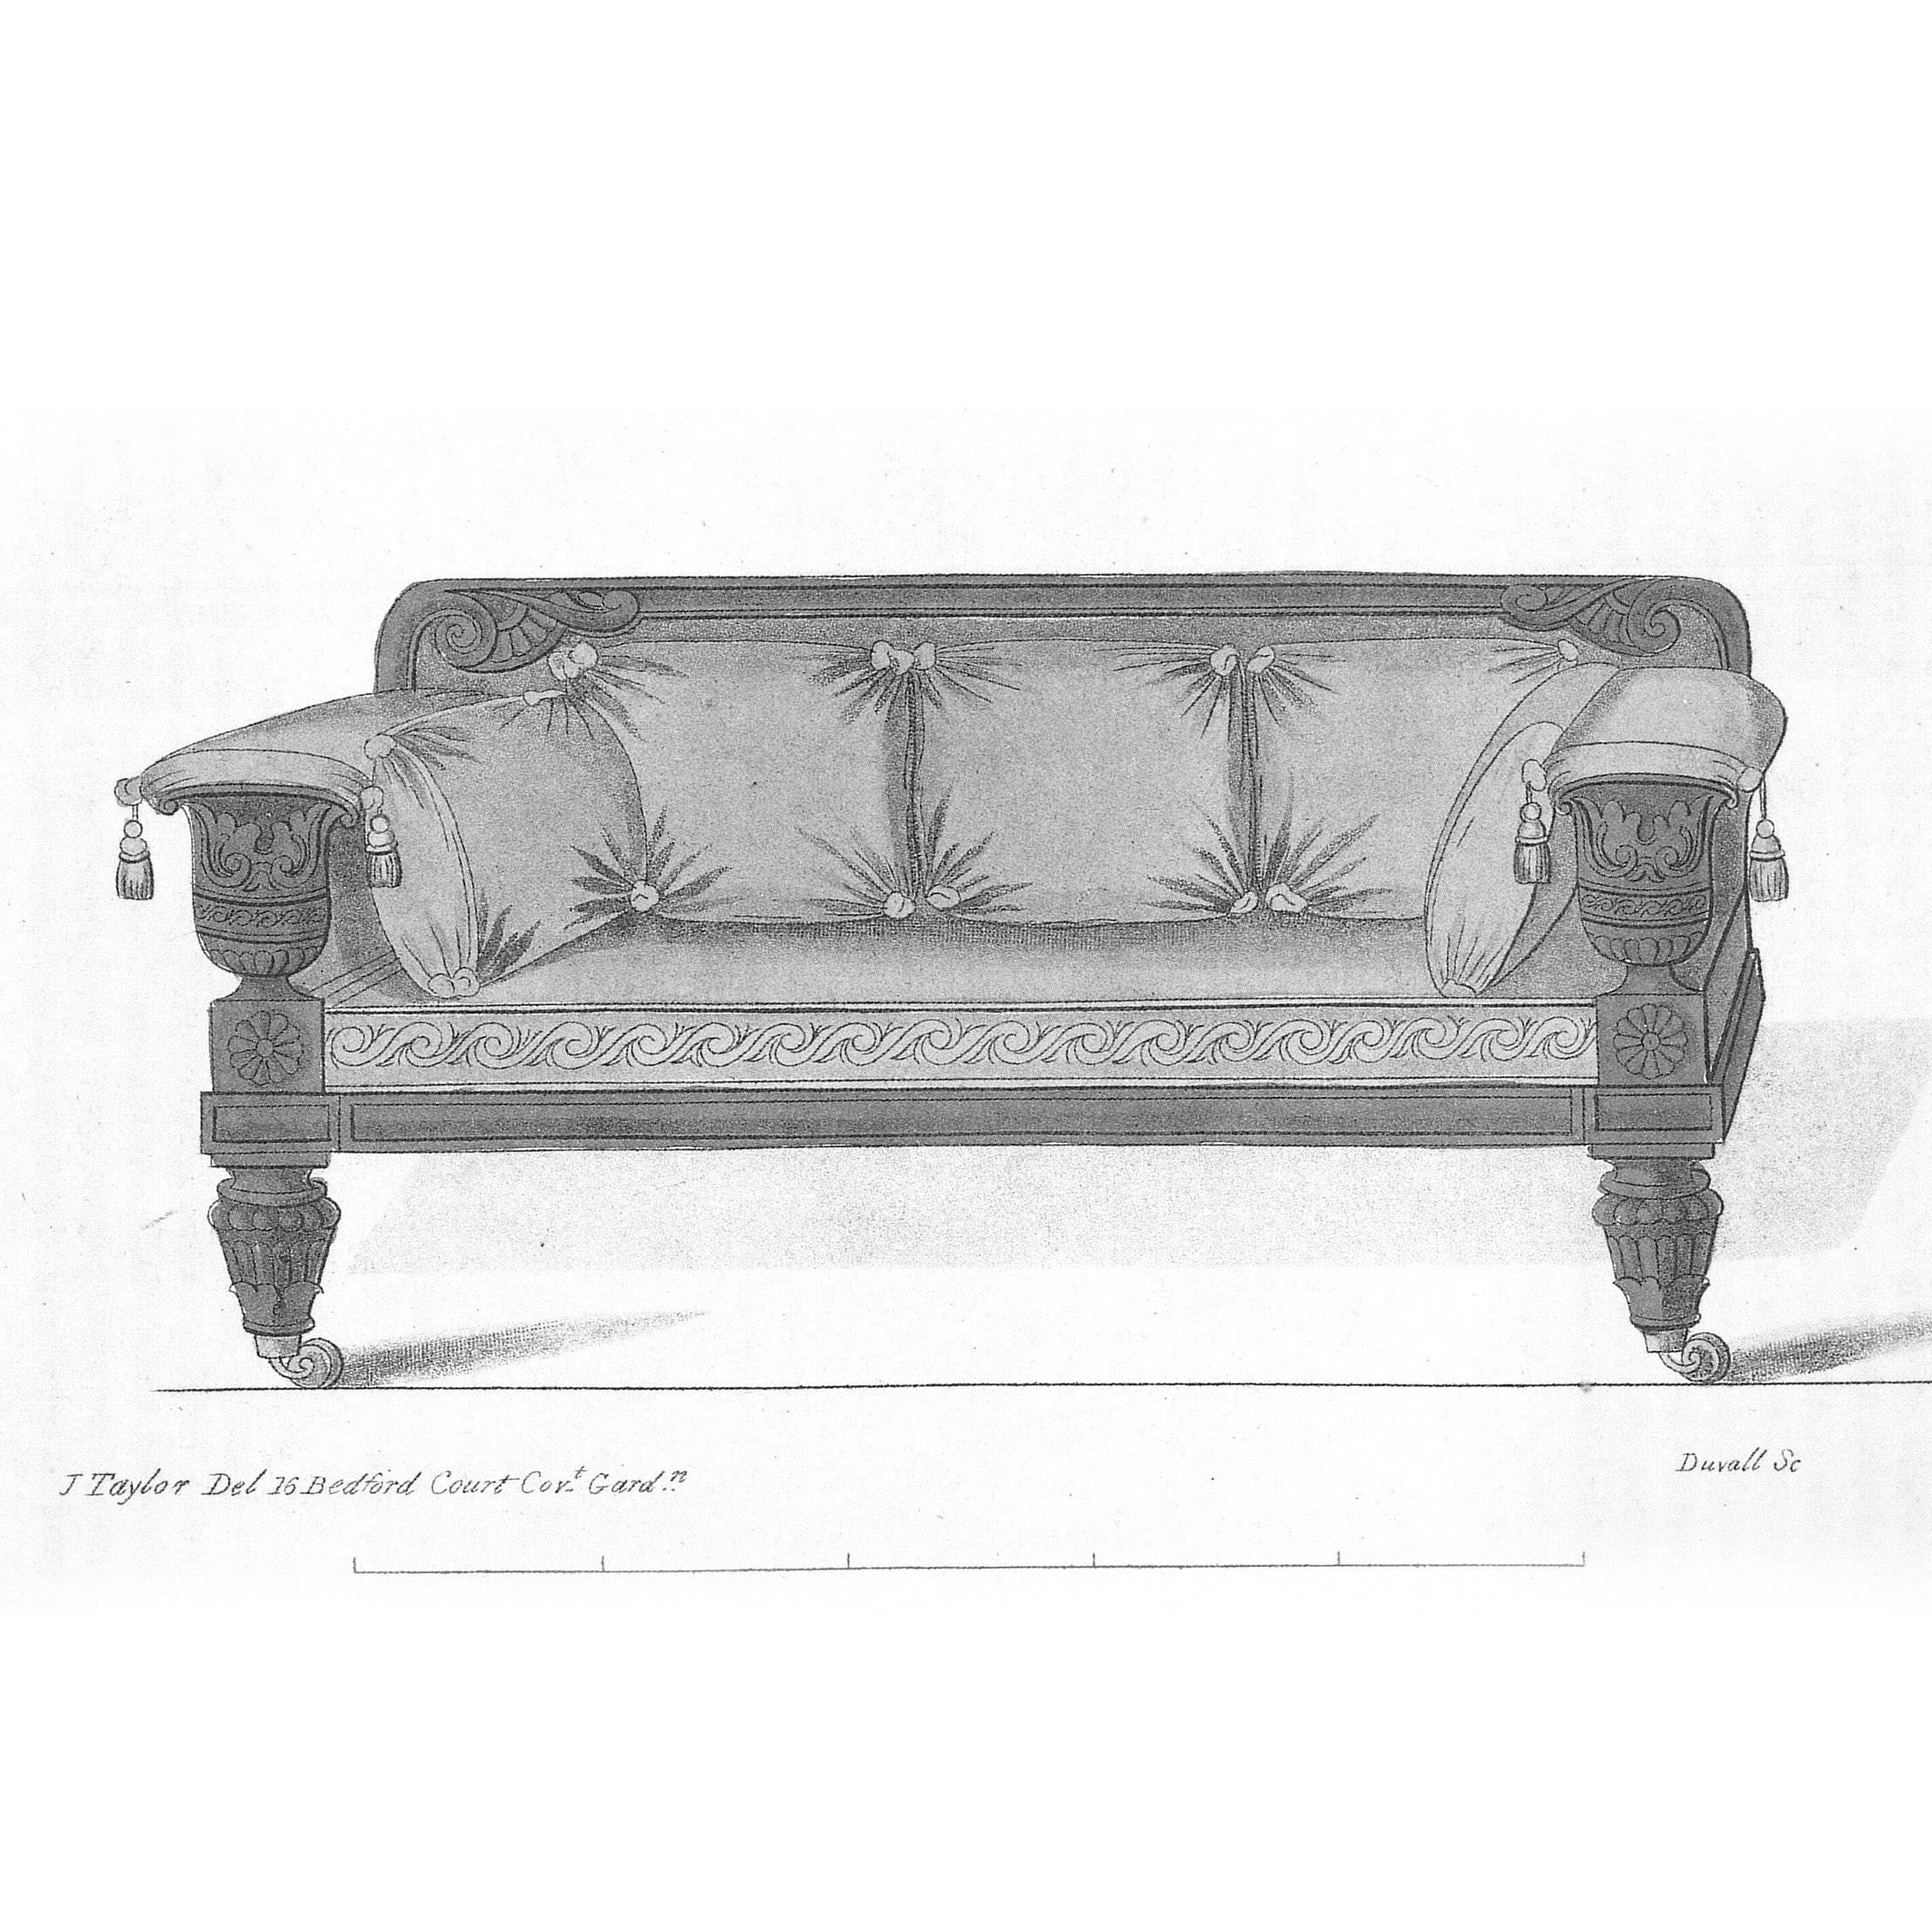 A very fine English Regency period carved mahogany sofa in the Grecian taste, after a design by John Taylor, circa 1820.

The panelled top rail with acanthus-wrapped scroll ends, above a padded back and seat, above the reeded Grecian urn-shaped